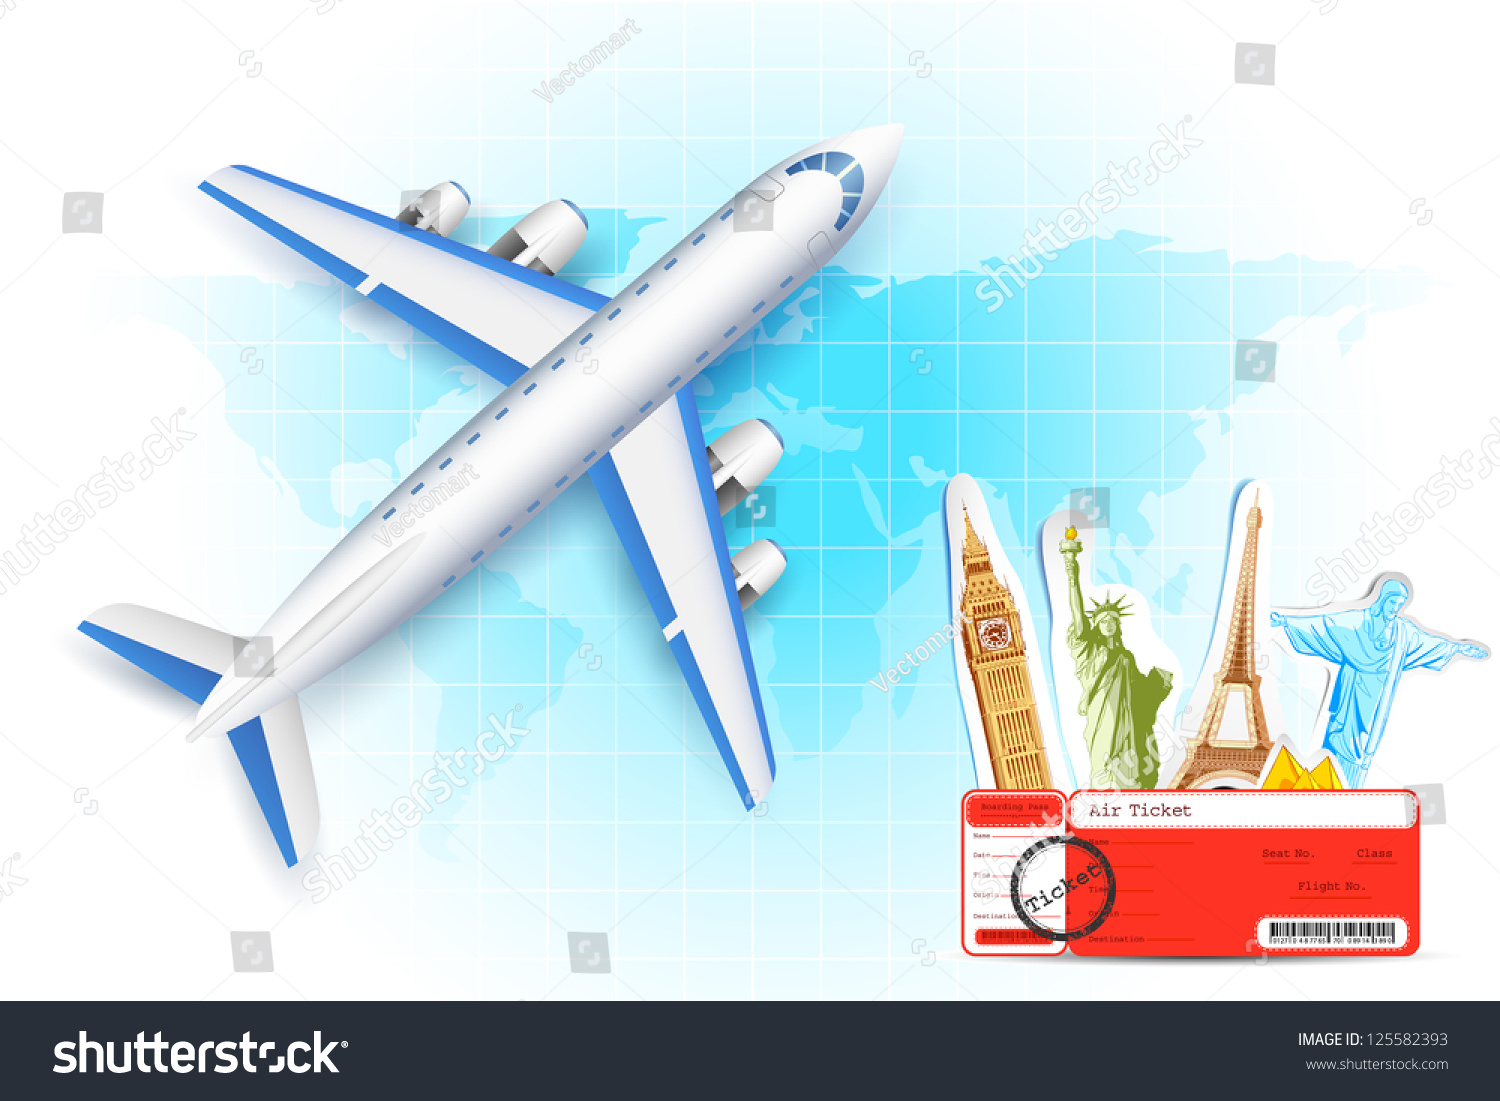 SVG of illustration of airplane with air ticket and world famous monument svg